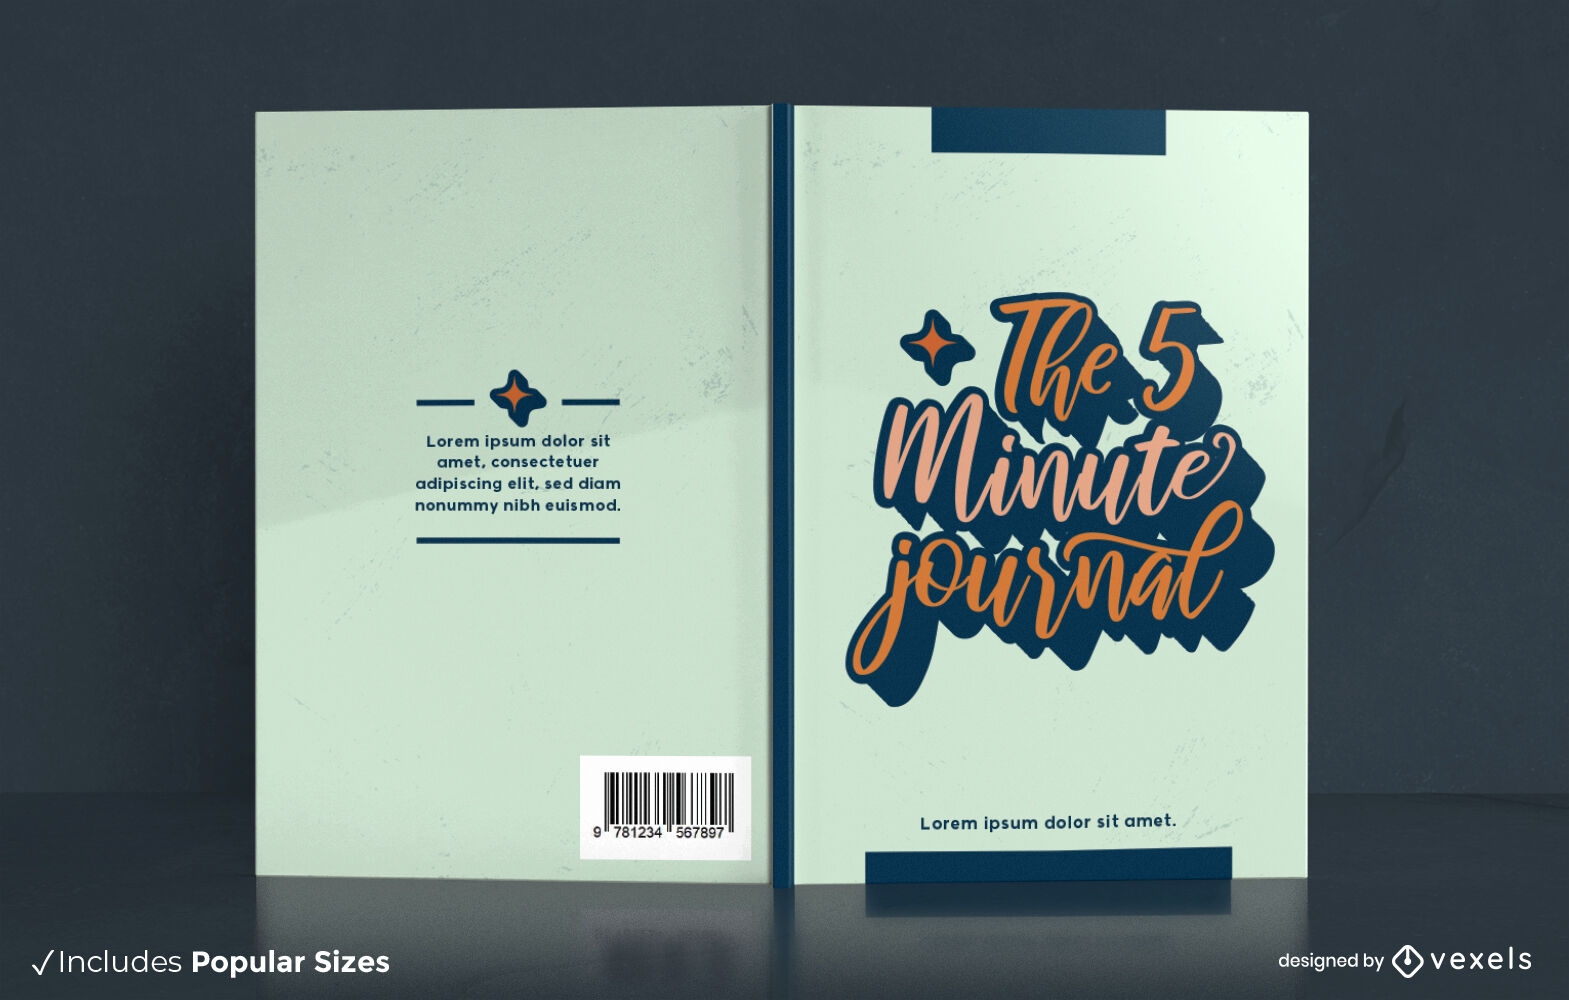 Five minute lettering journal cover design